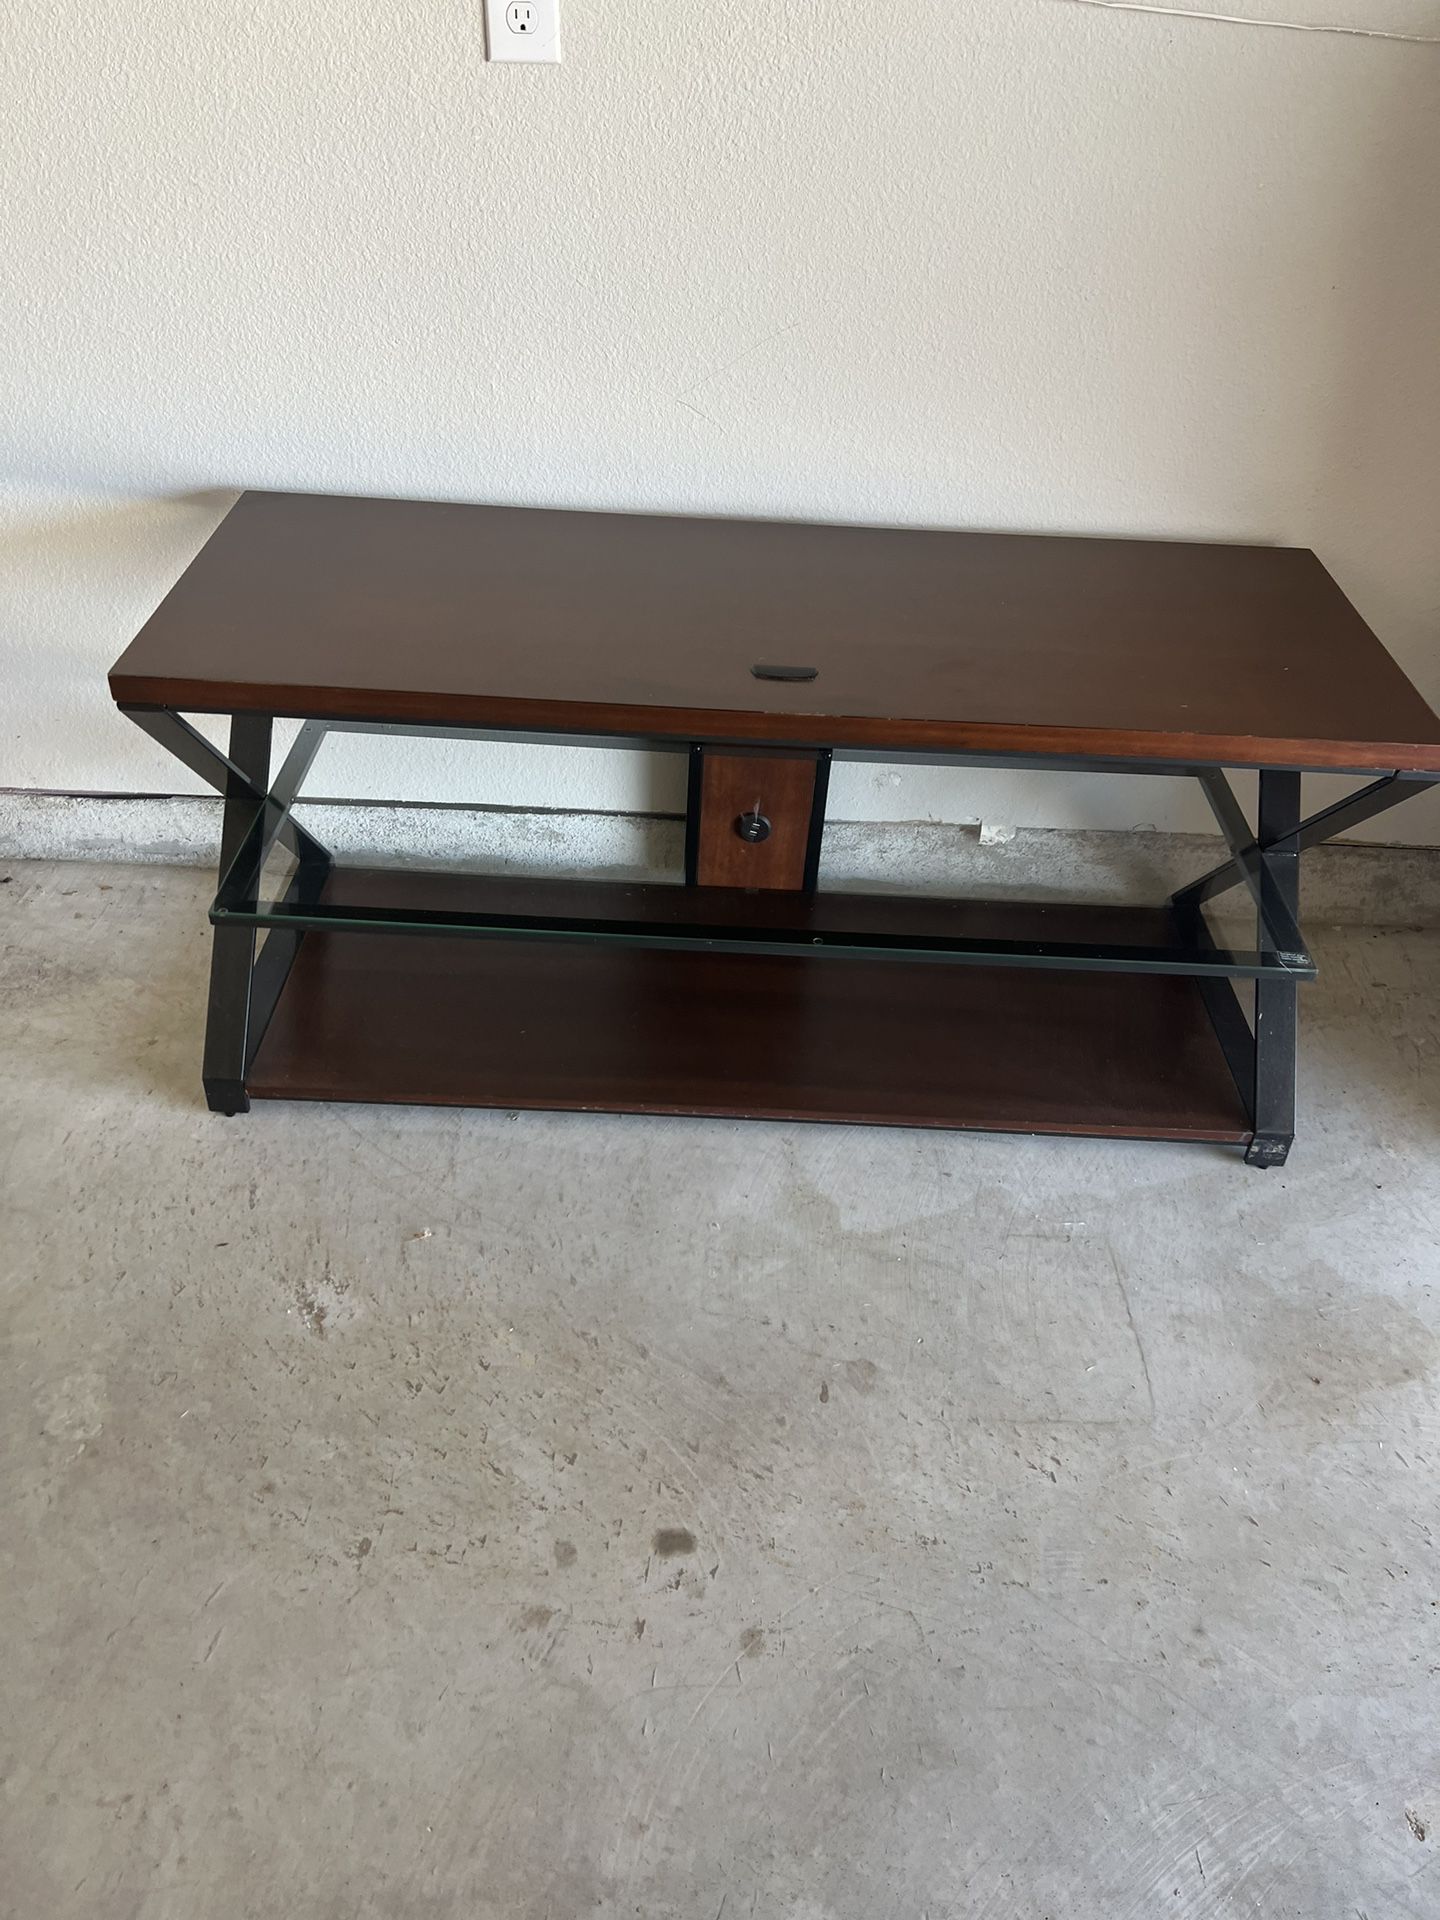 BEAUTIFUL WOOD TV STAND WITH TV MOUNT